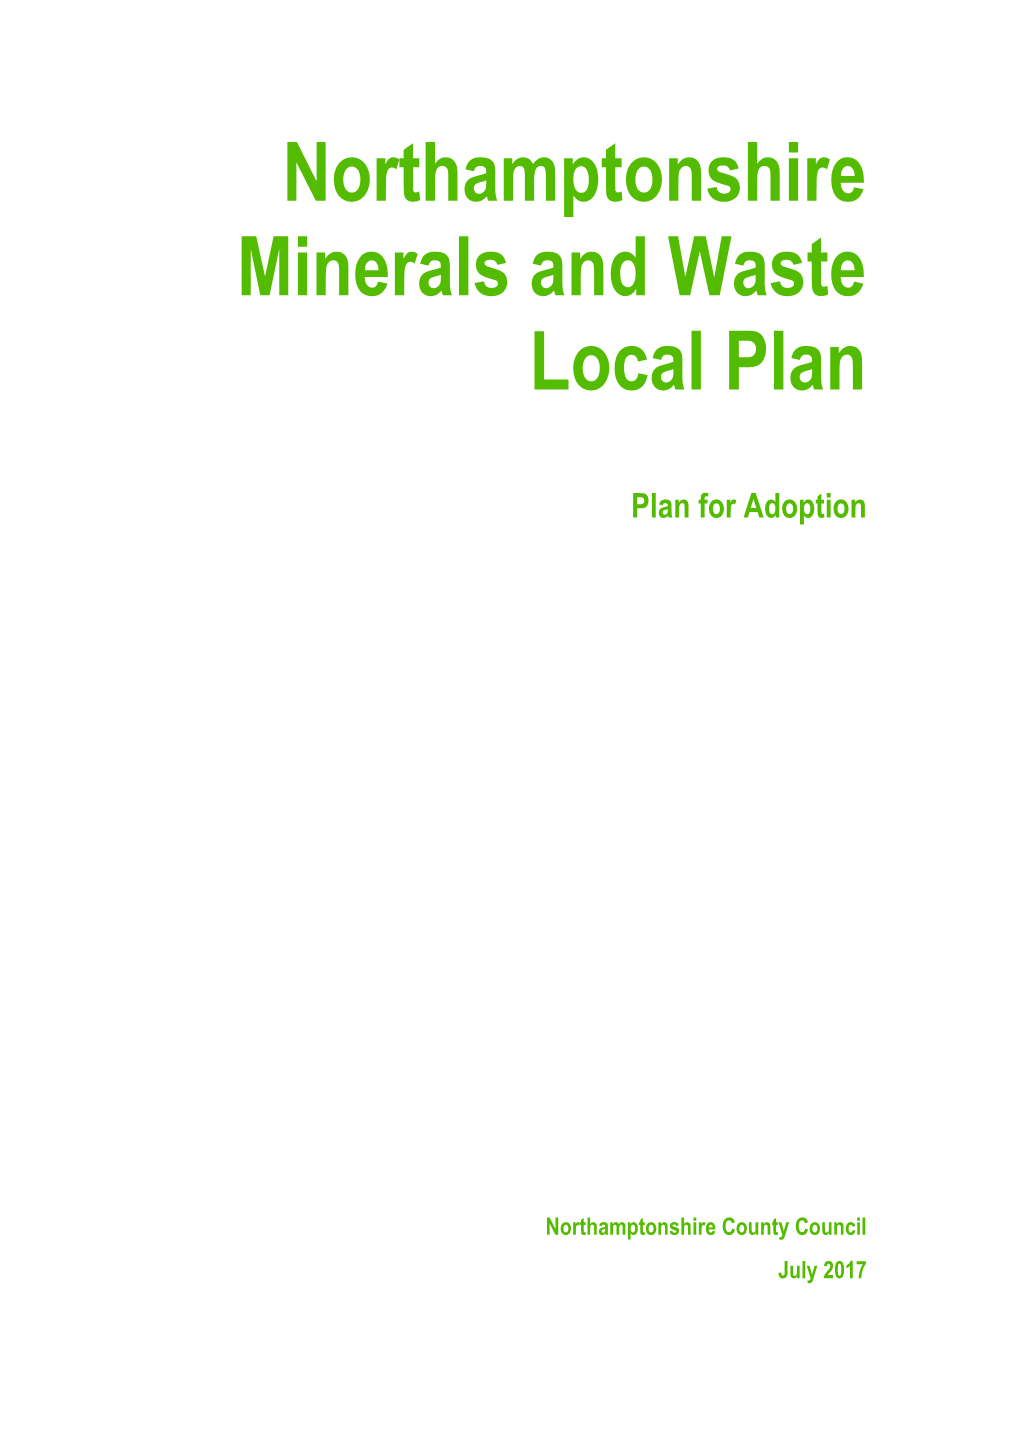 Northamptonshire Minerals and Waste Local Plan